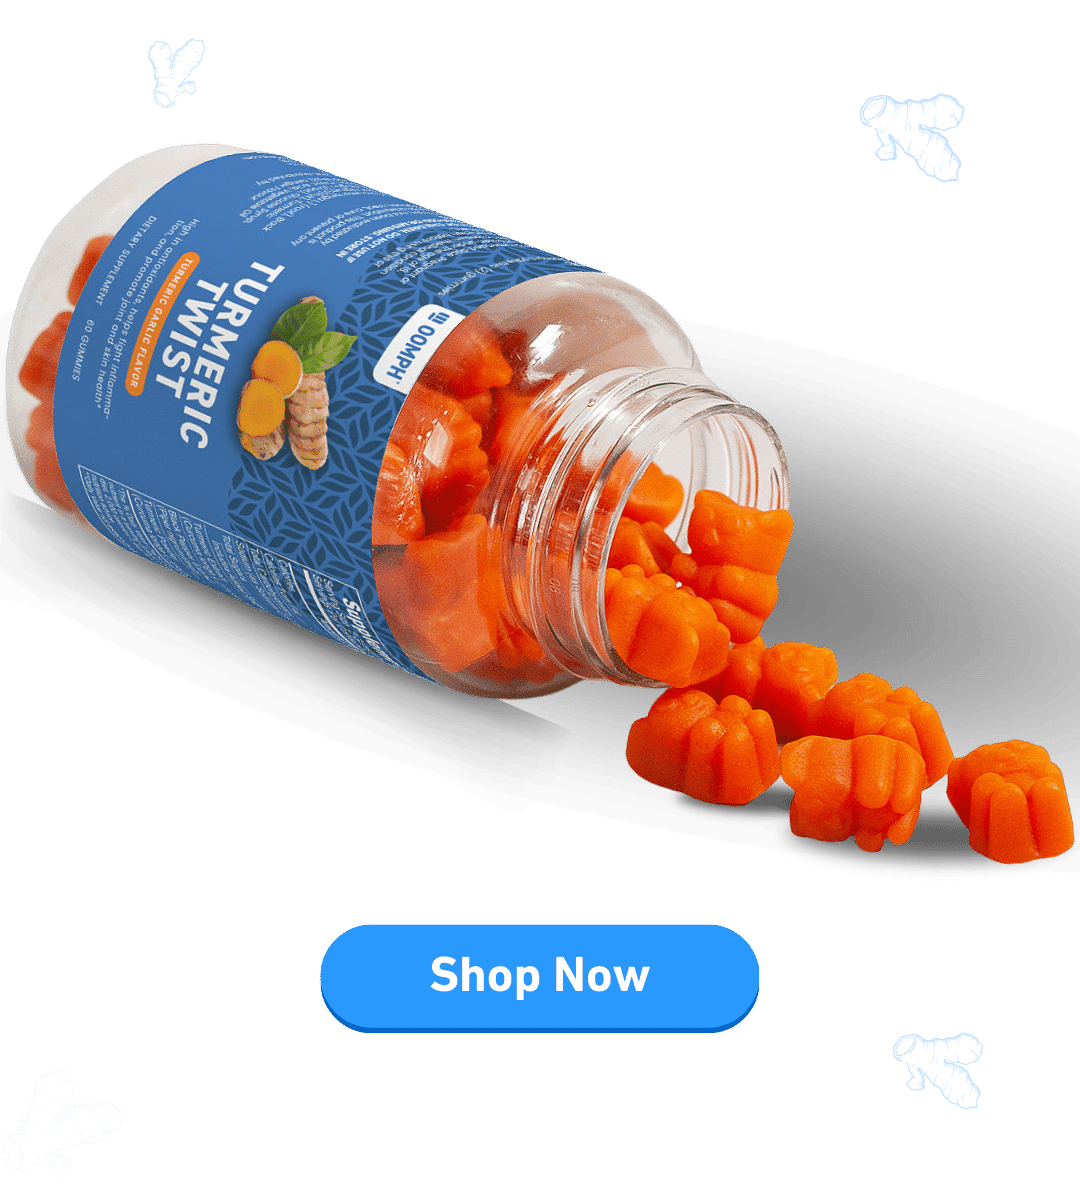 Oomph Fitness Turmeric Twist Gummies, Turmeric Gummies for Reduced Inflammation and Better Health